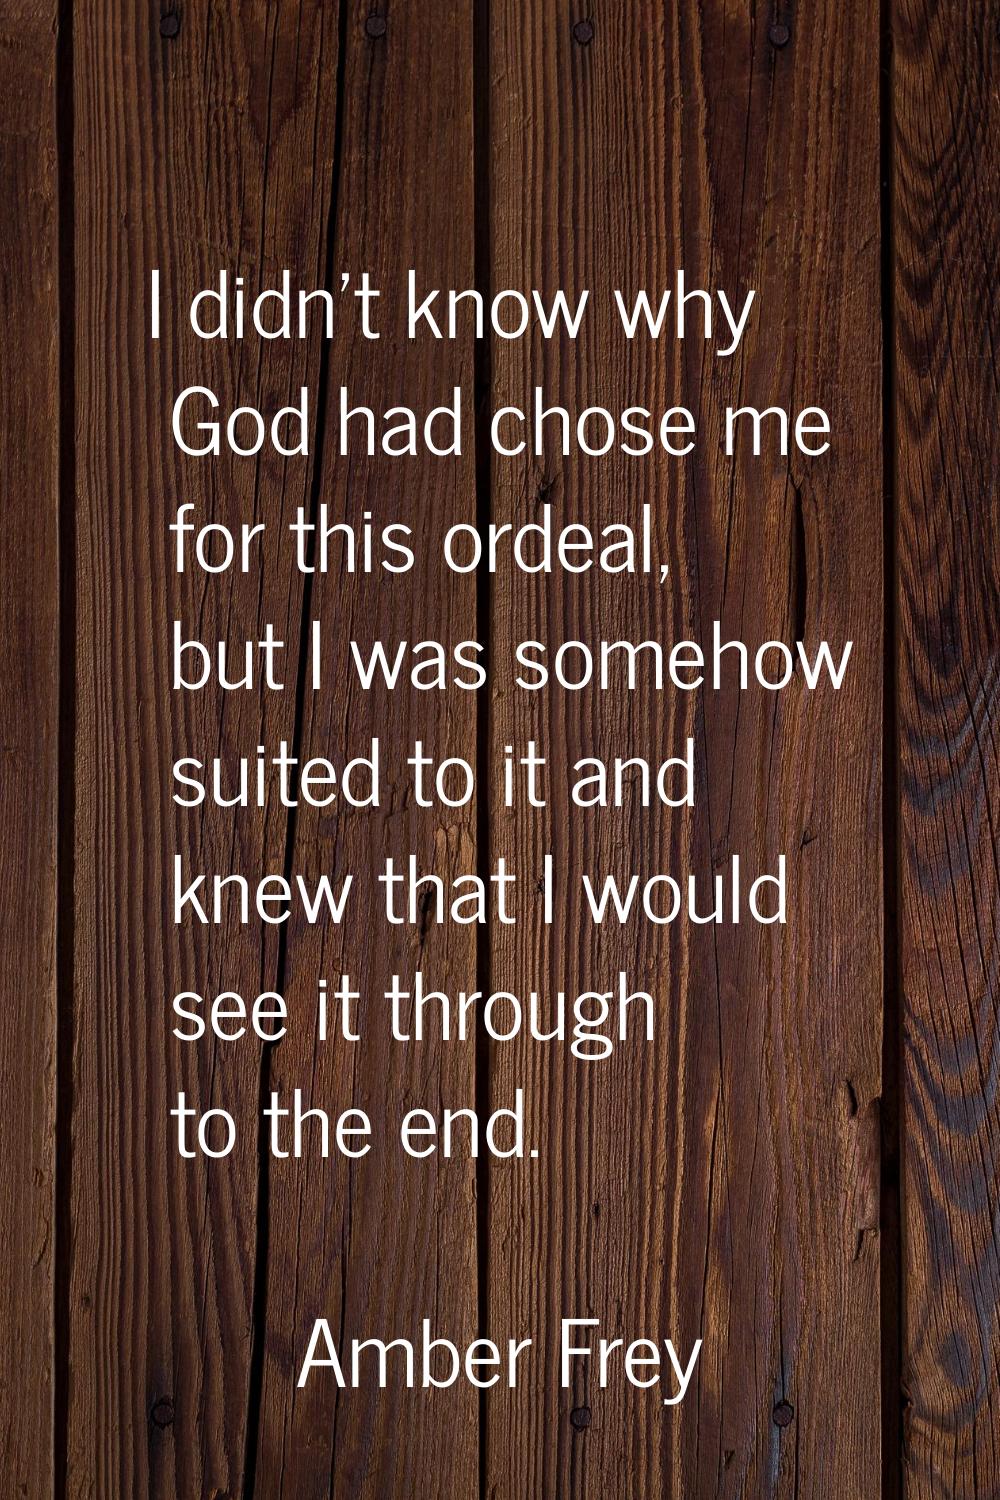 I didn't know why God had chose me for this ordeal, but I was somehow suited to it and knew that I 